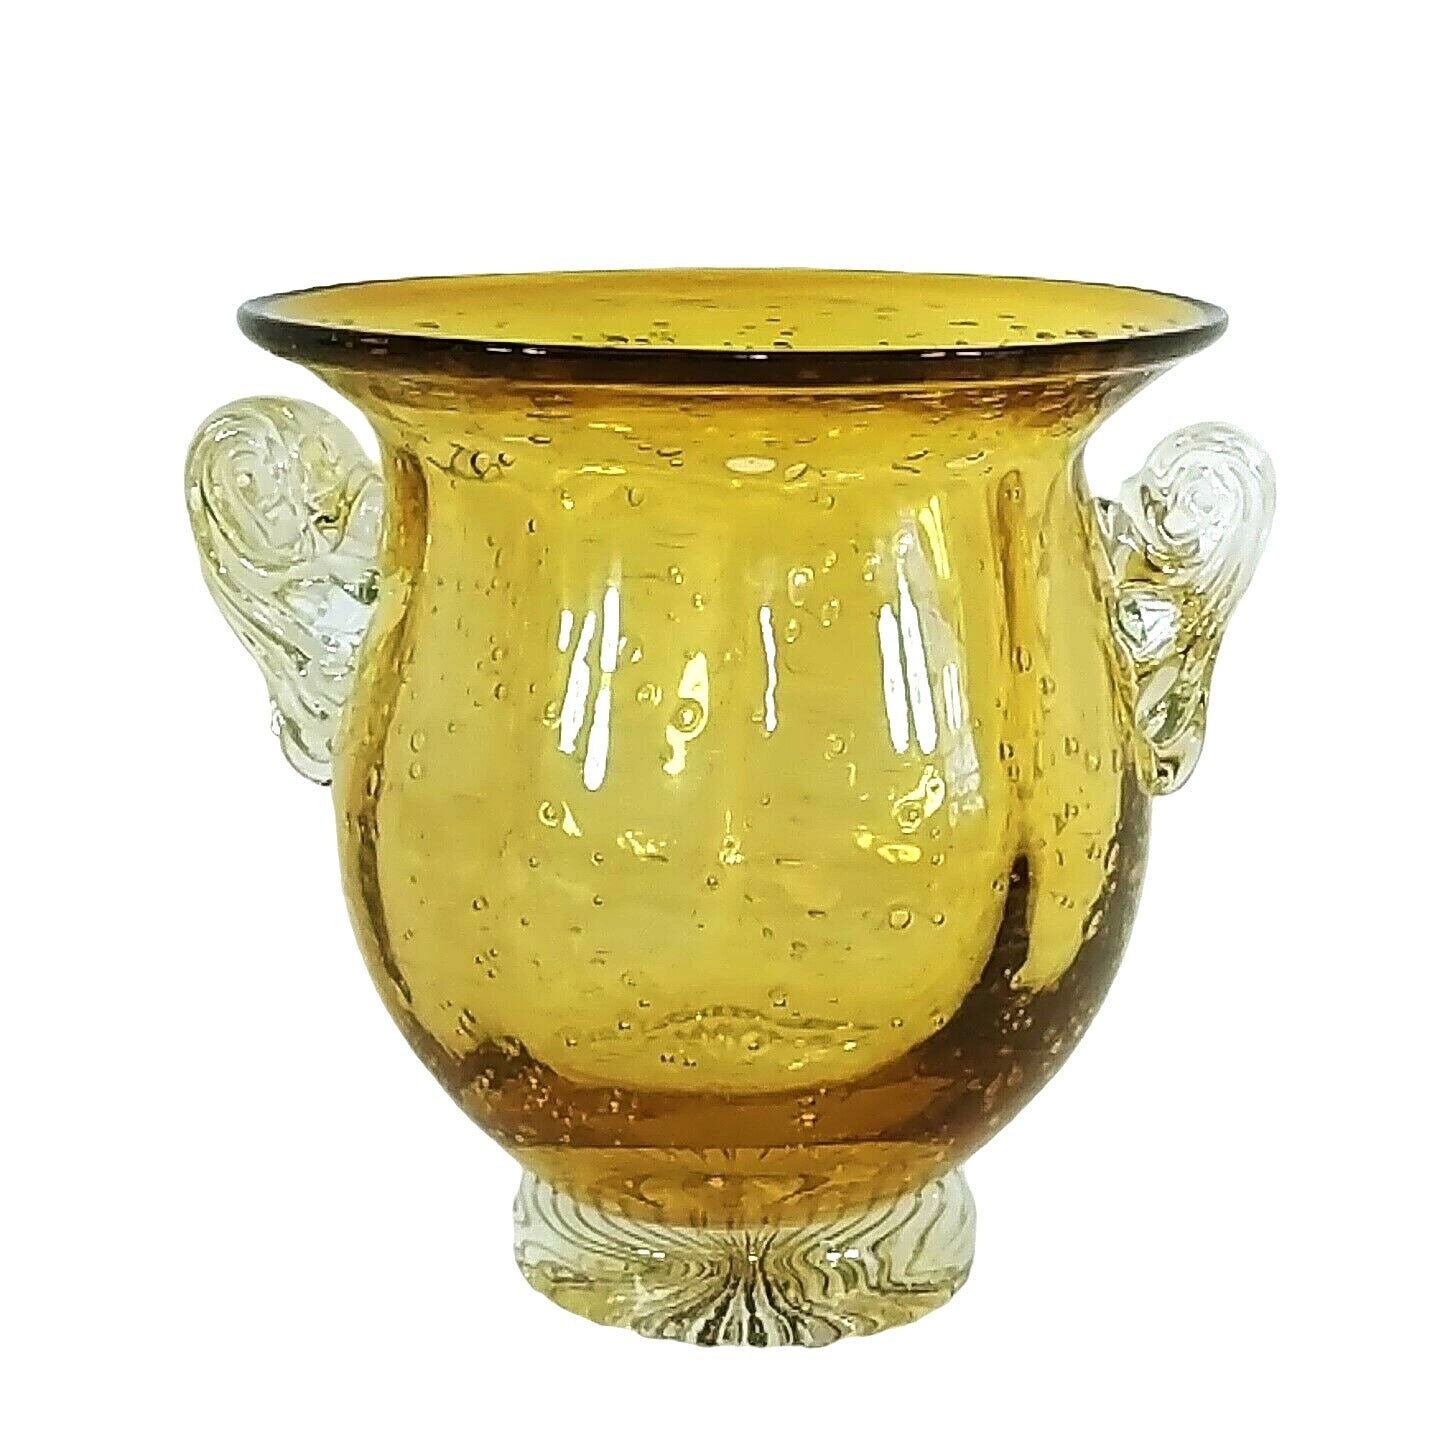 Vase Hand Blown Art Glass Amber Footed with Handles Vintage 5.75"